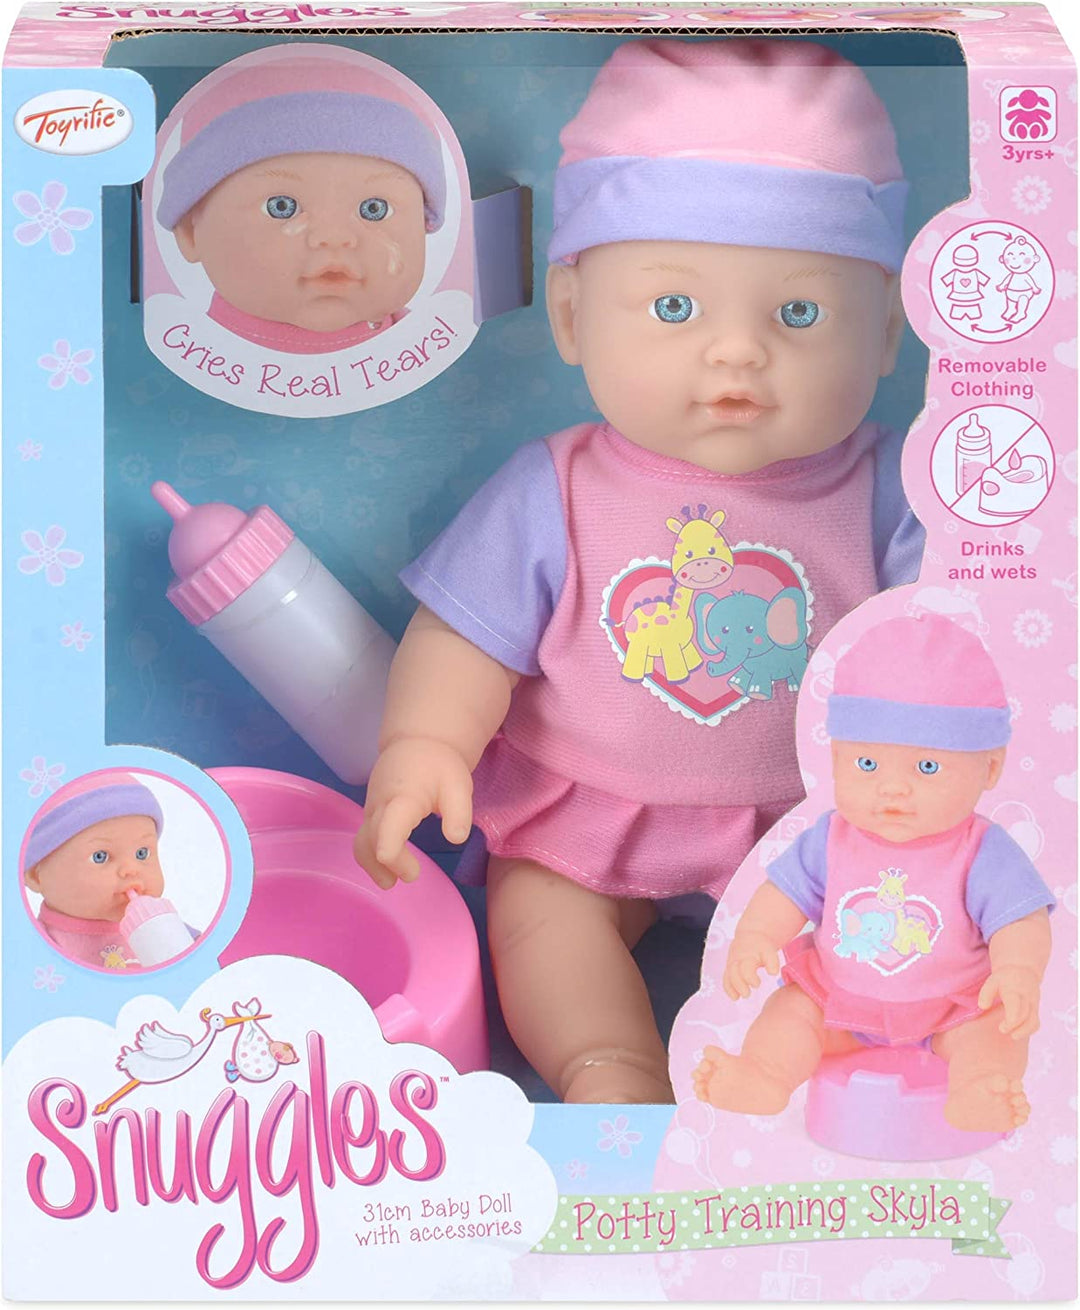 Toyrific Snuggles Baby Doll with Accessories, Cry, Drink and Wet function, Potty